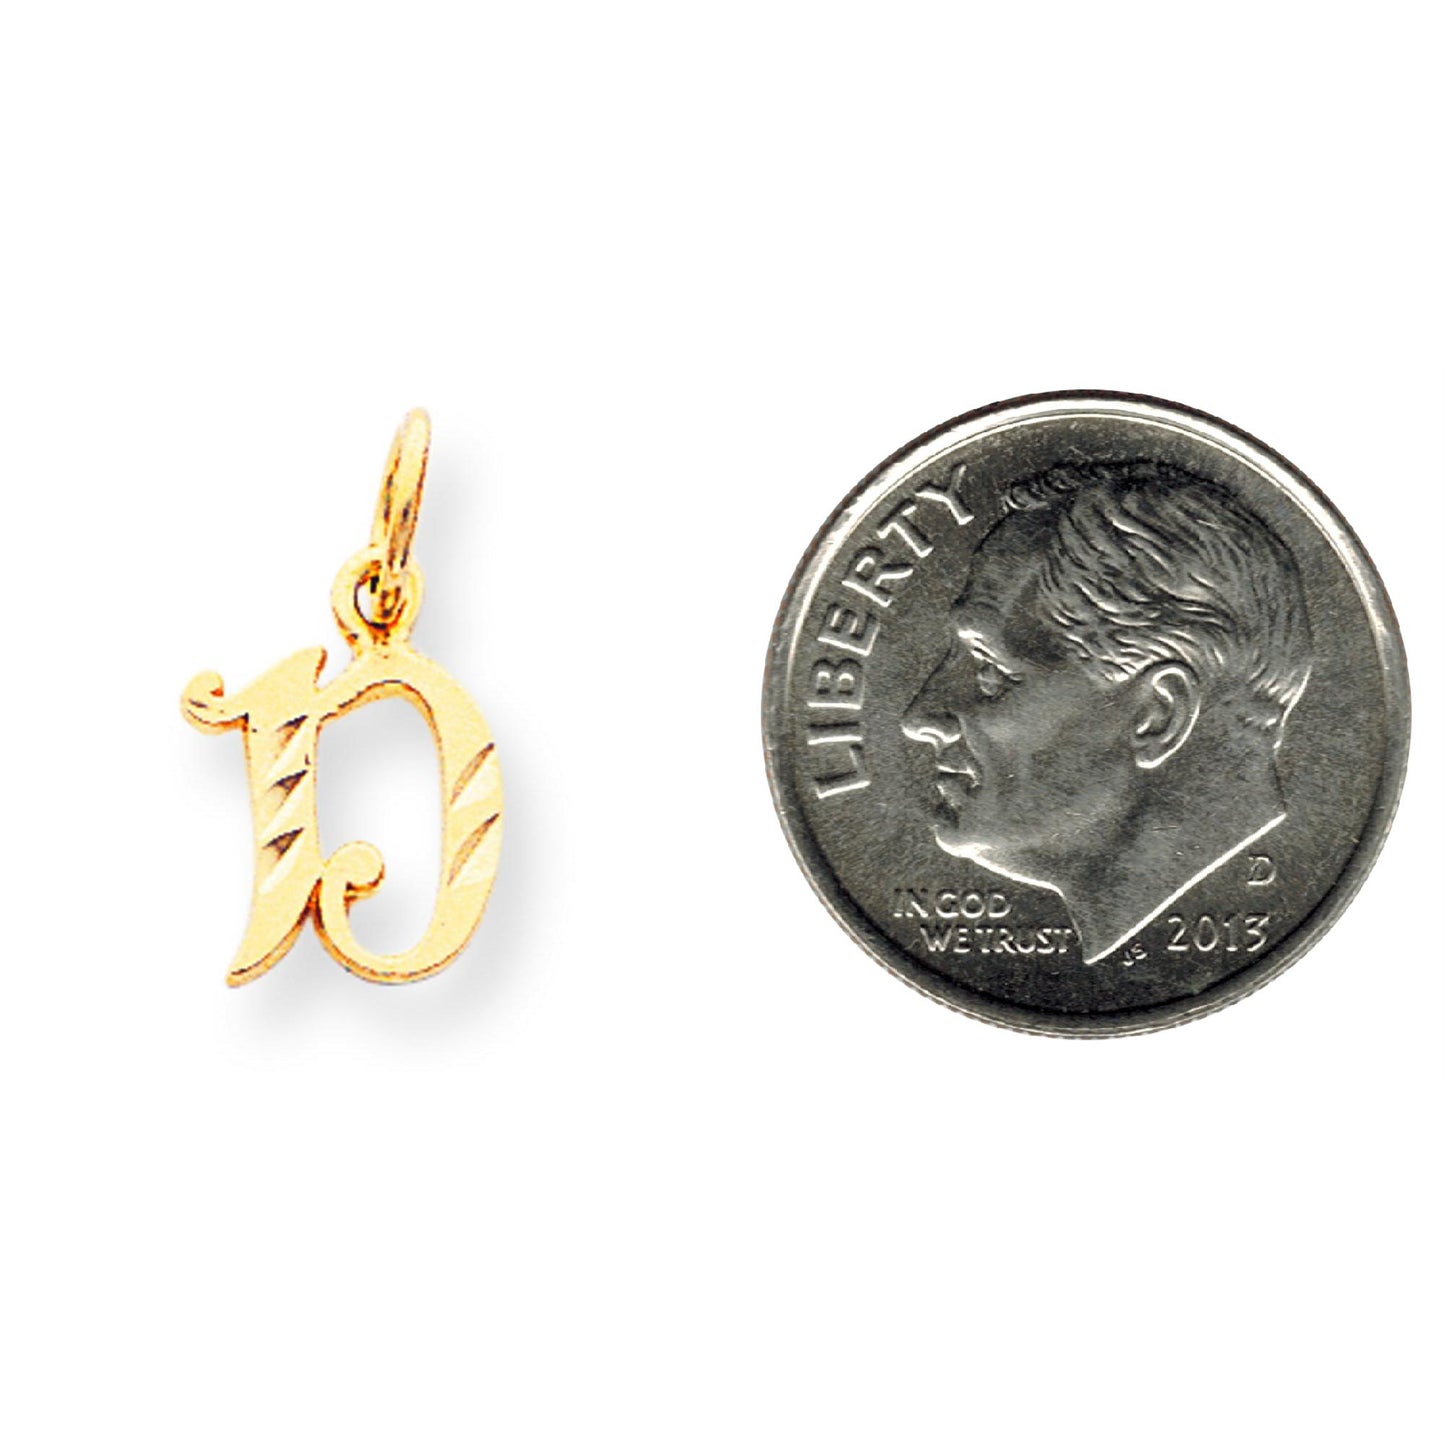 10K Yellow Gold Initial D Charm